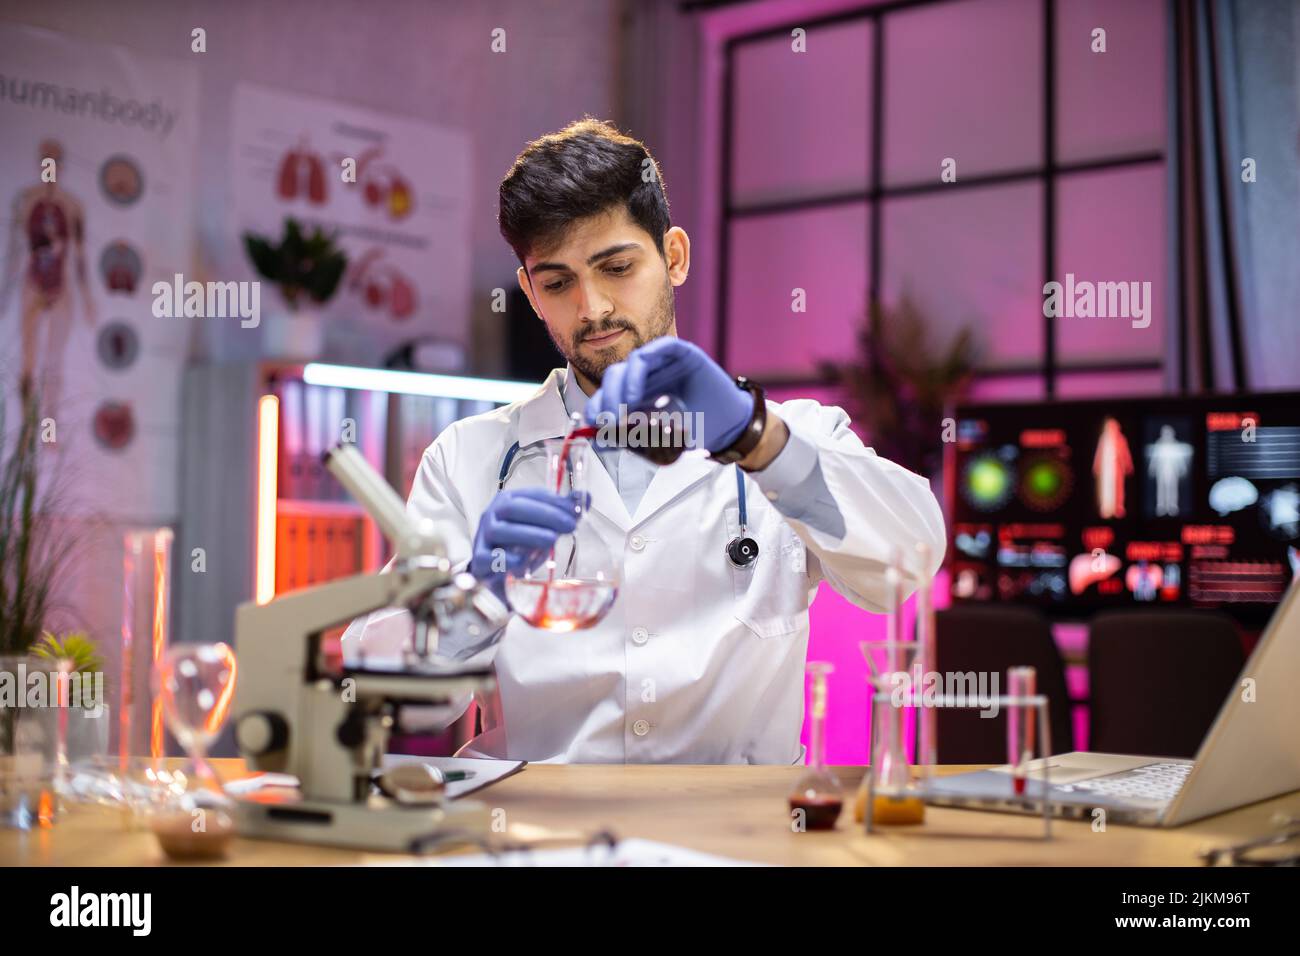 Male arab scientist working in modern lab. Doctor making microbiology research. Laboratory tools: microscope, test tubes, equipment. Coronavirus covid-19, bacteriology, virology, dna and health care. Stock Photo